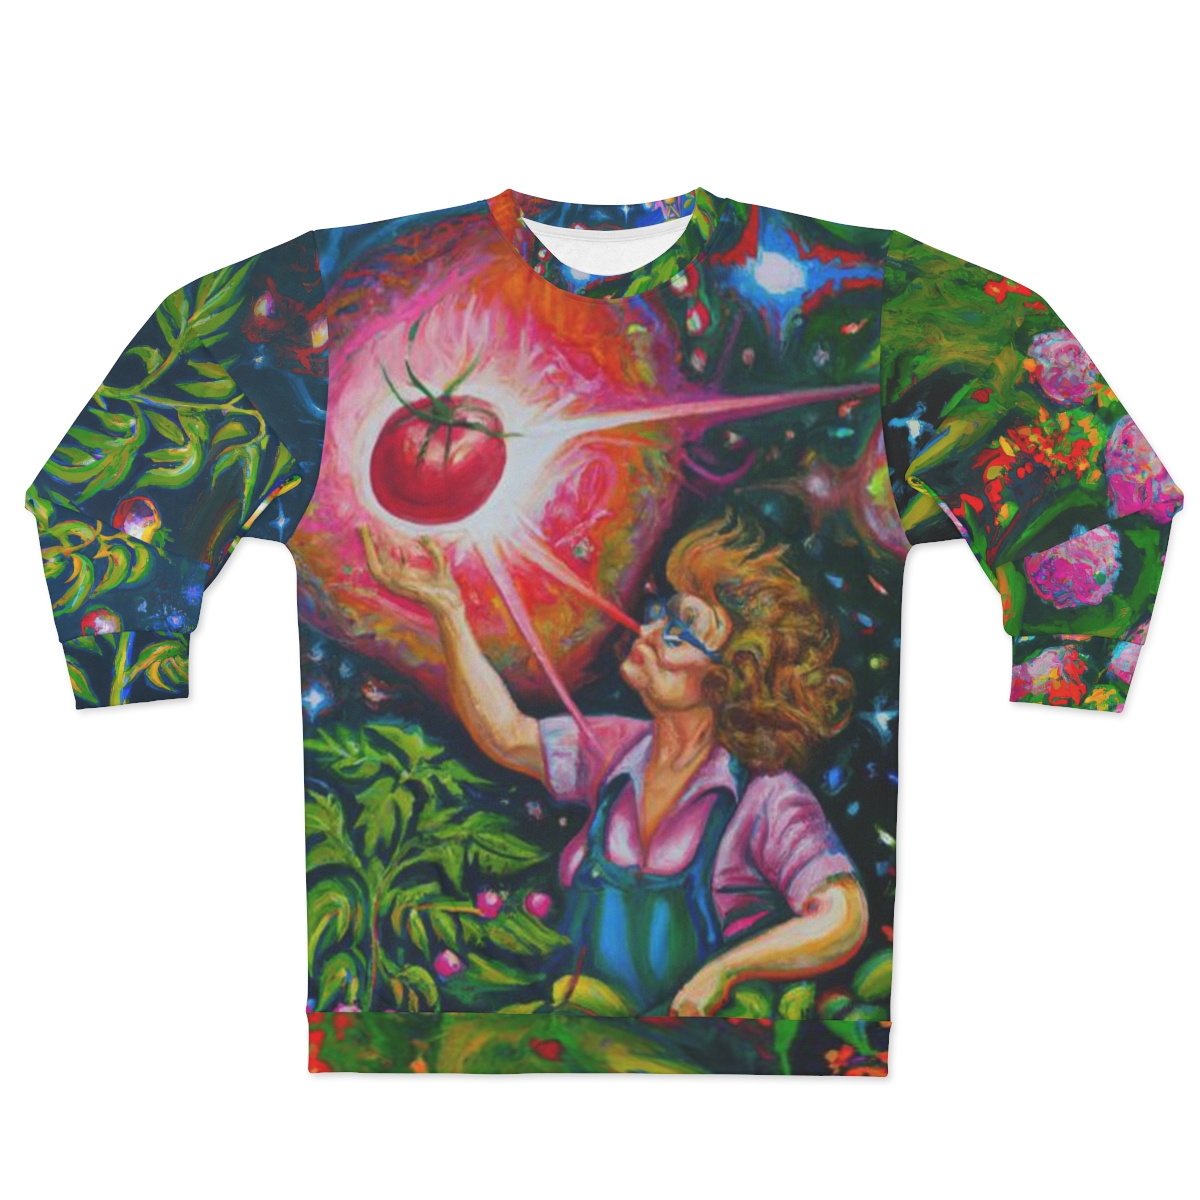 A 'Tomato Love' Sweatshirt (All Over Print) by Green Thumb Nursery featuring a tomato-holding girl.